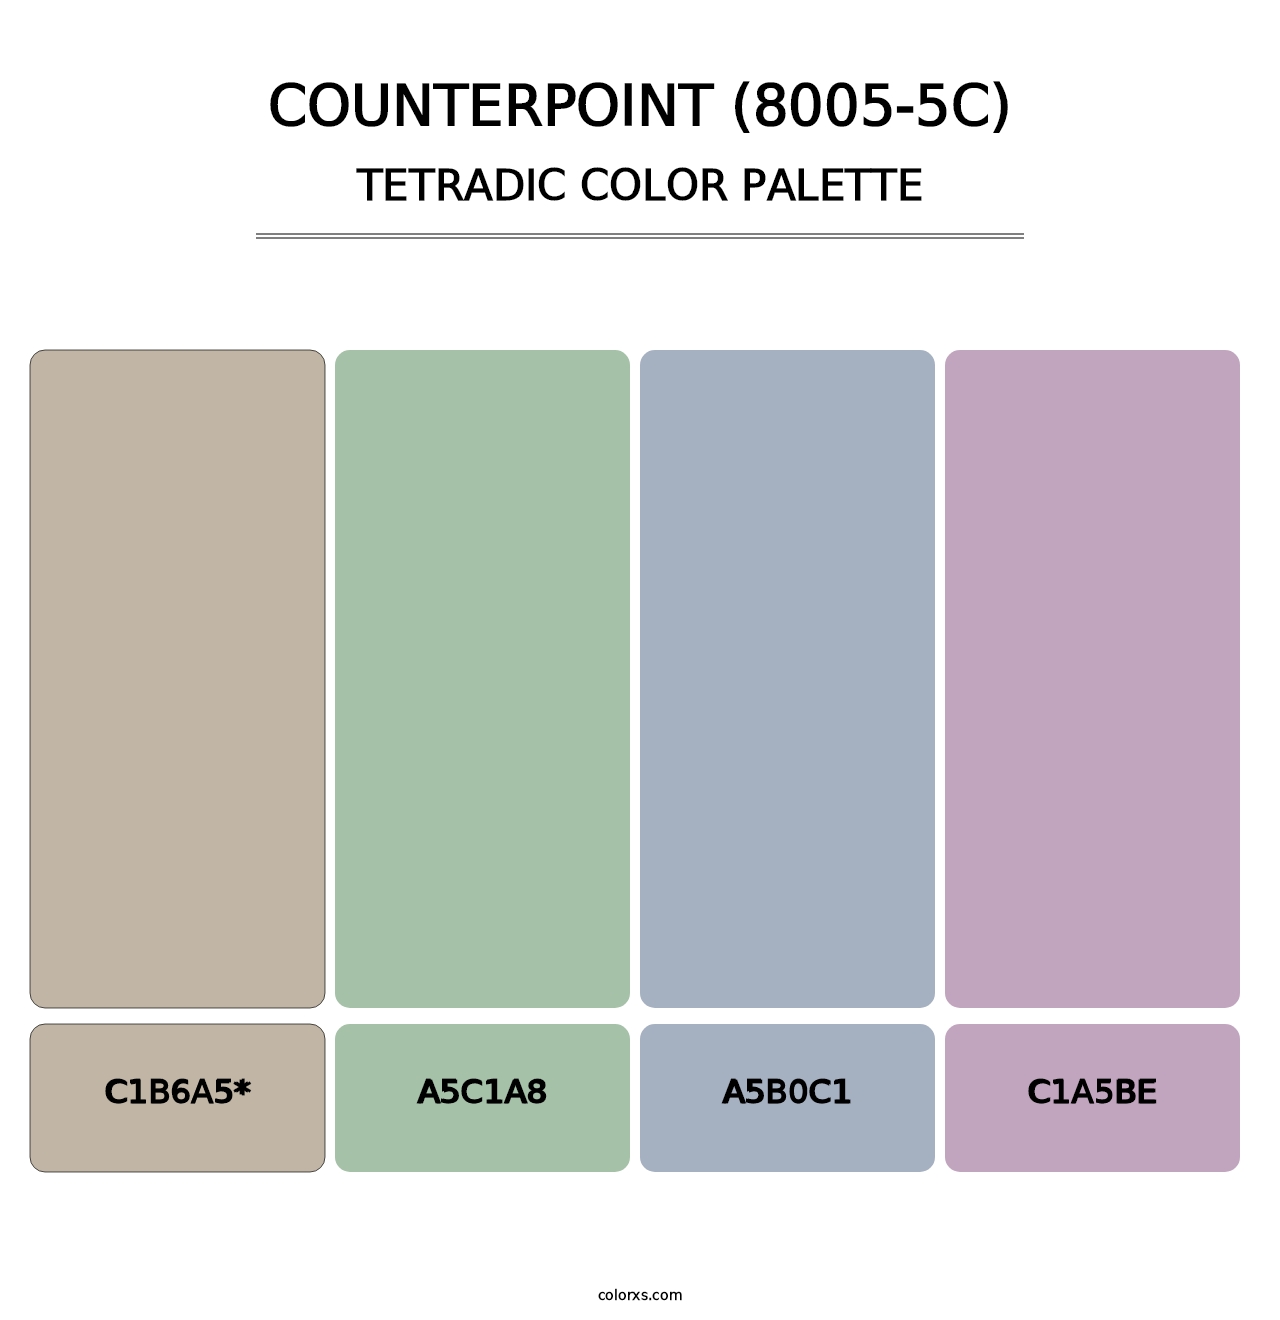 Counterpoint (8005-5C) - Tetradic Color Palette